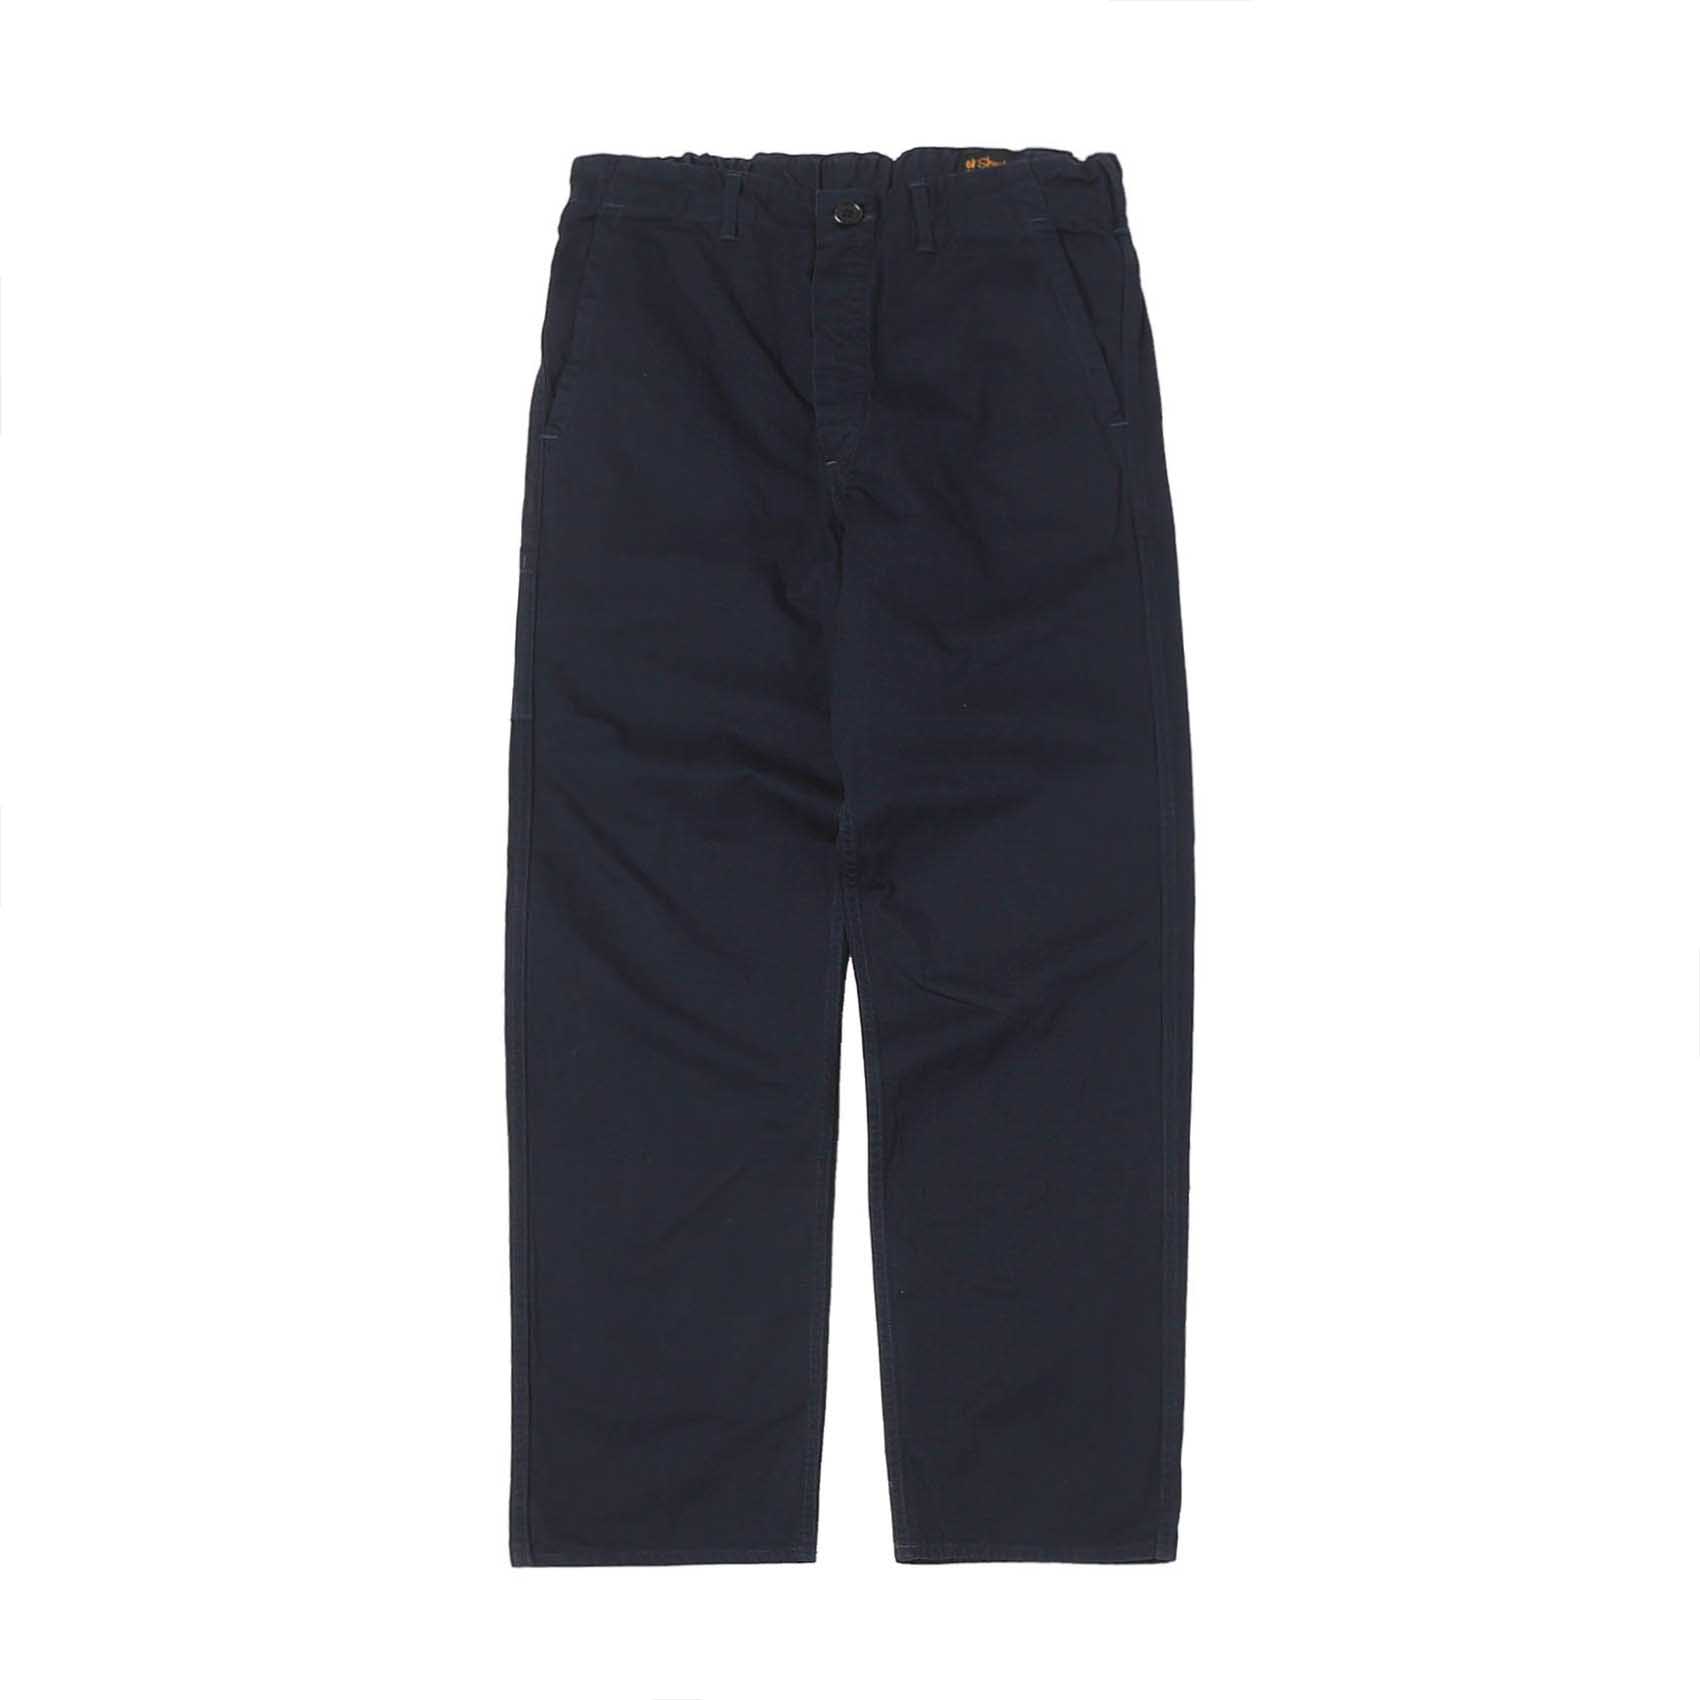 FRENCH WORK PANTS - NAVY